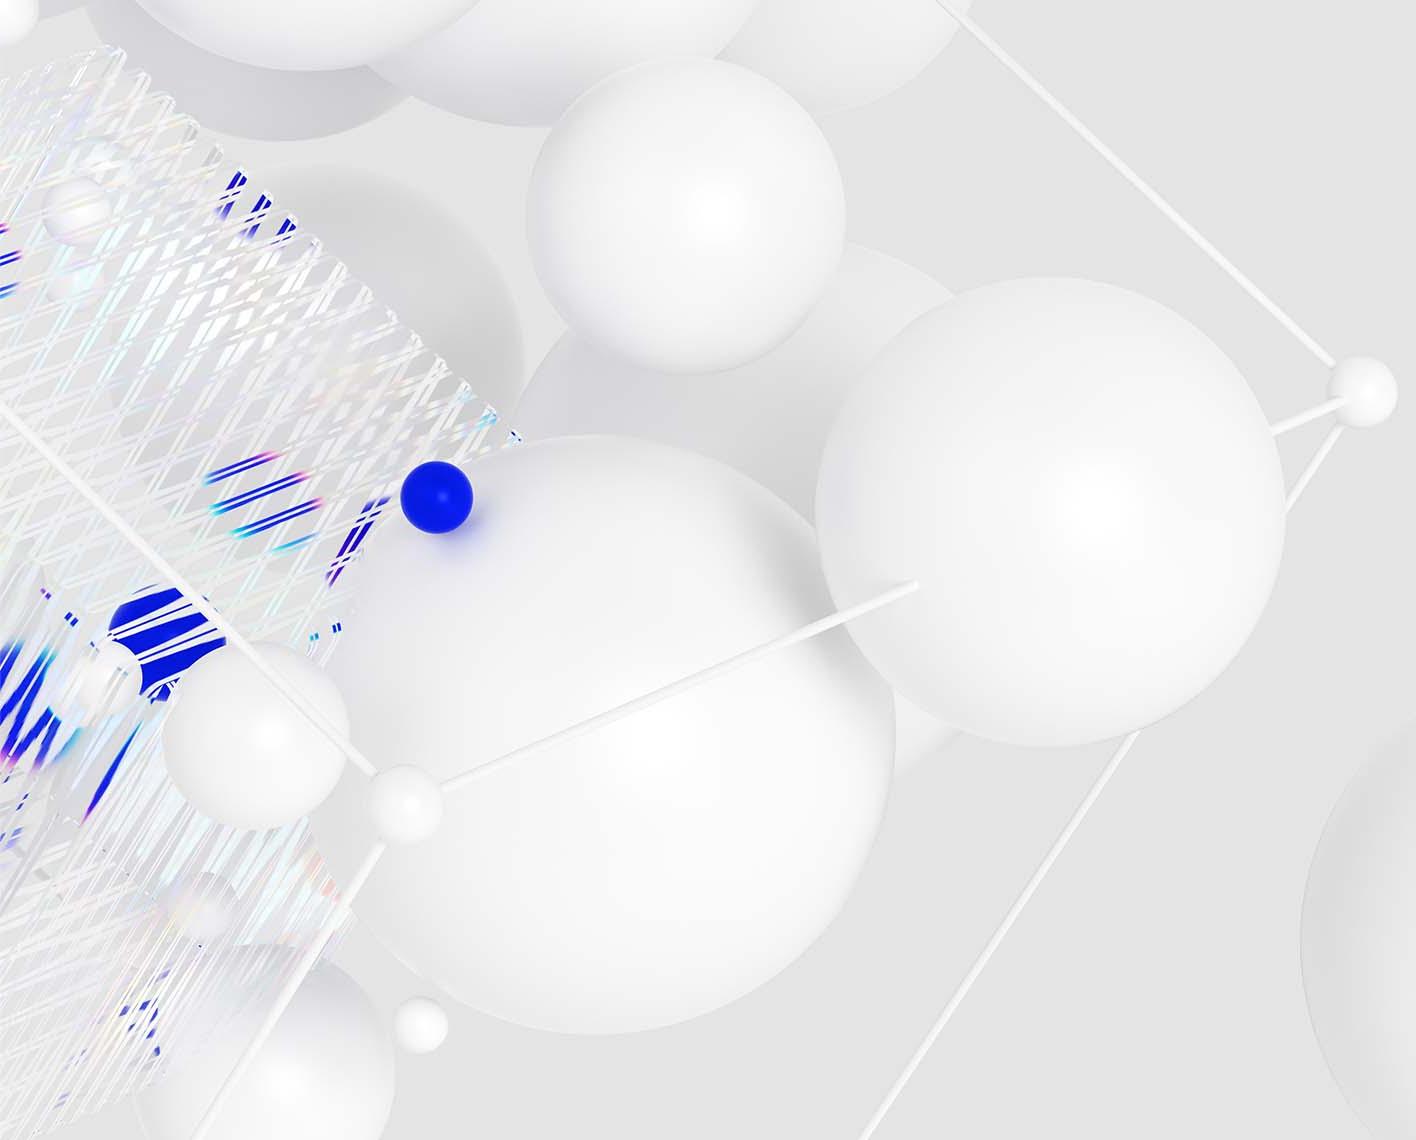 3D CGI image of white and blue spheres on a white background (欧洲杯投注平台_Carbon_Capture_04)